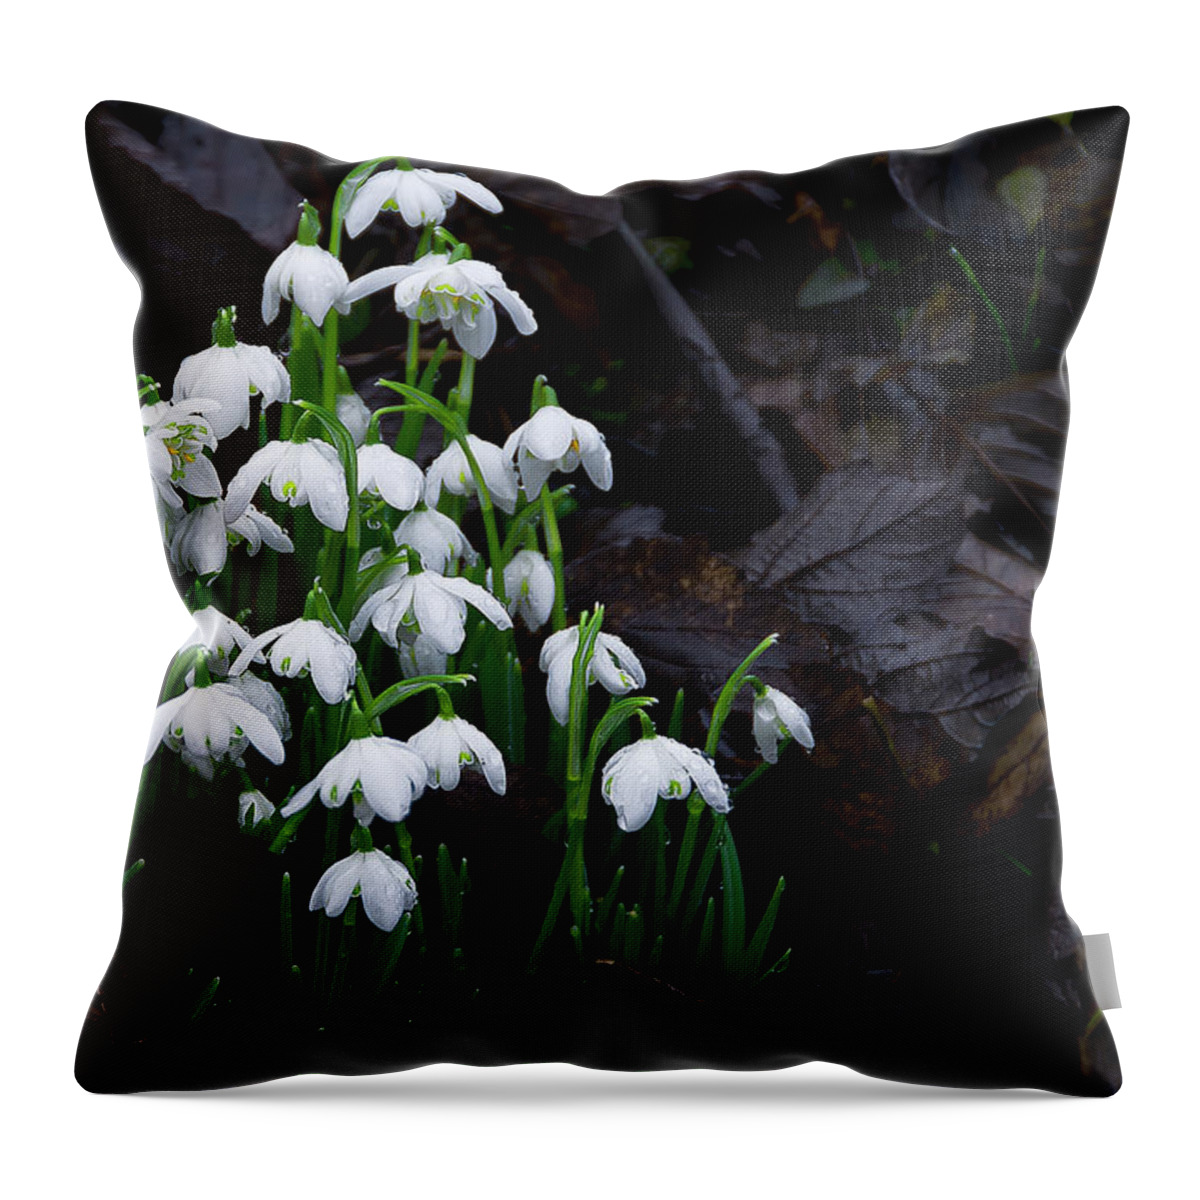 Snow Throw Pillow featuring the photograph Beginning #1 by Svetlana Sewell